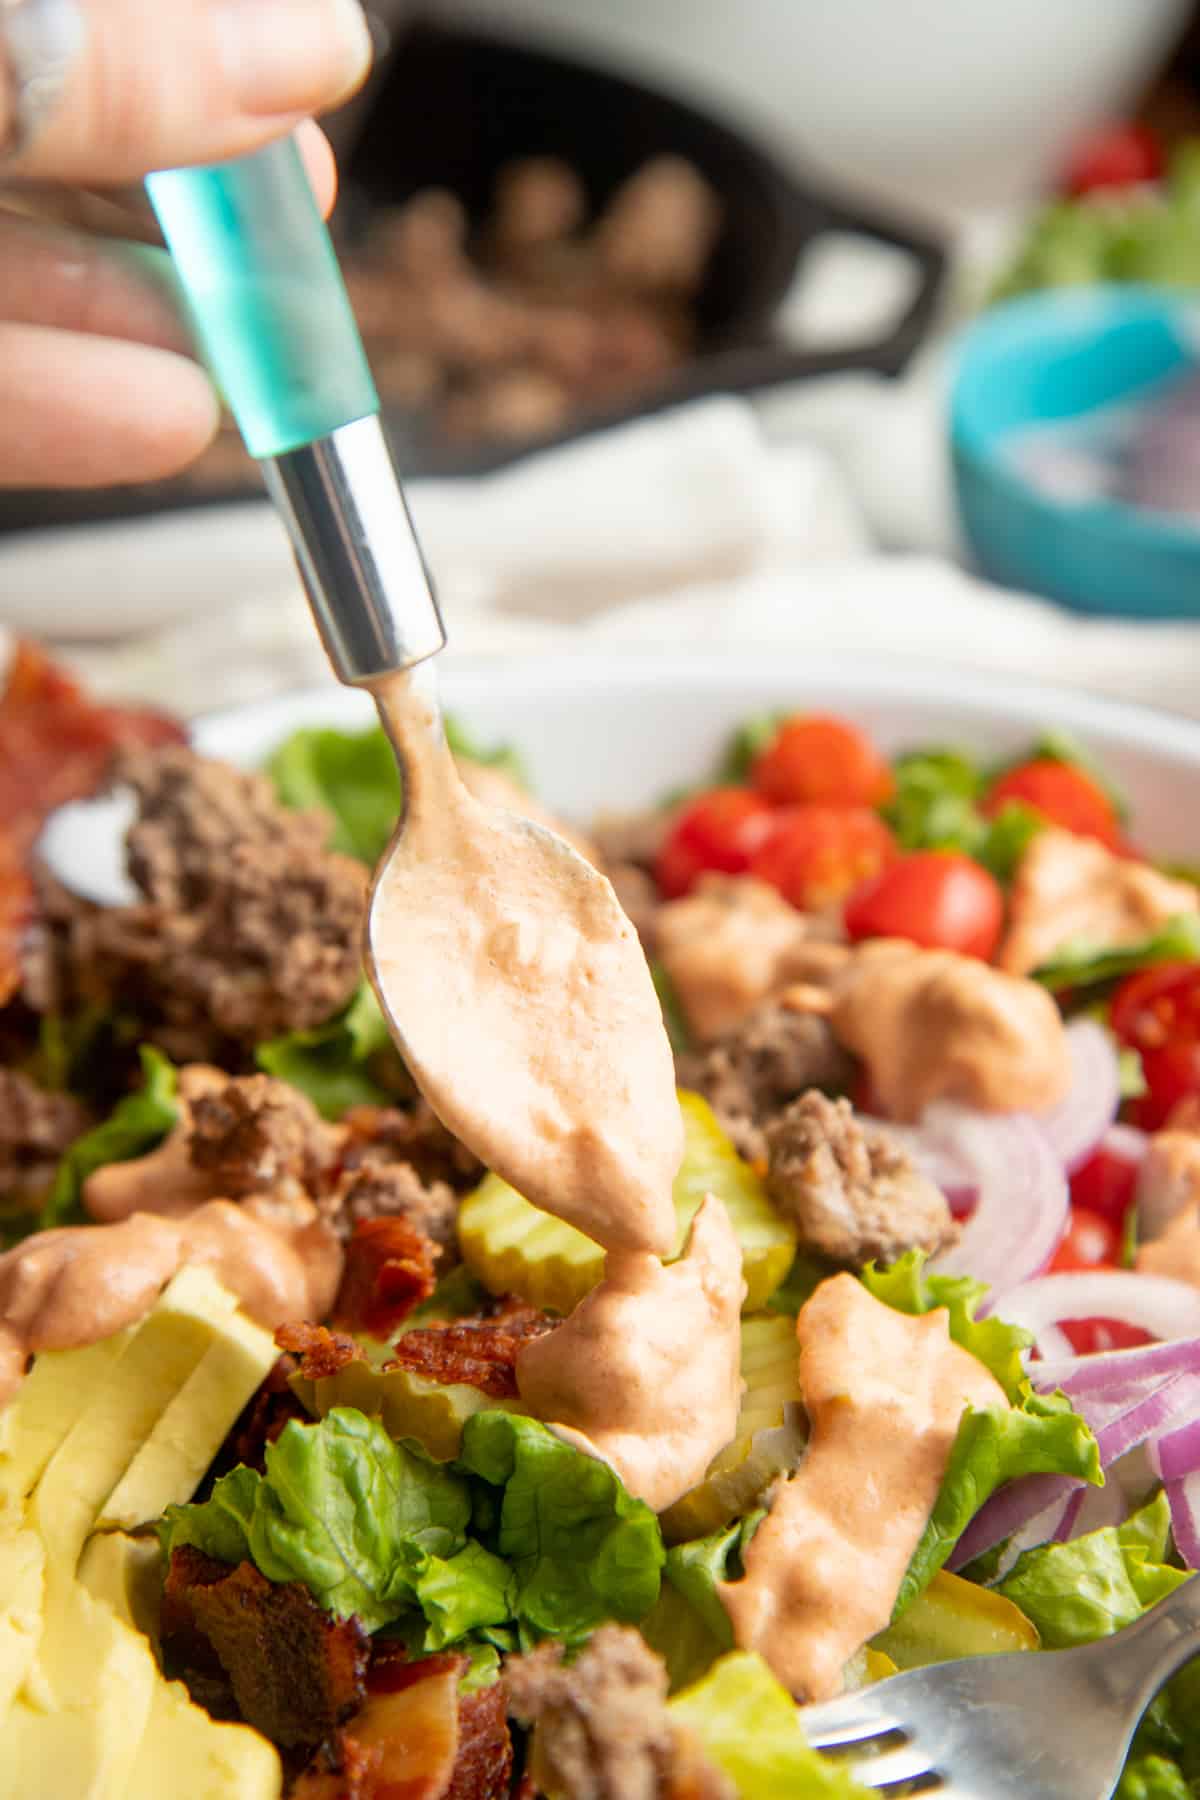 A spoon with a blue handle drizzles "special sauce" over a burger bowl.